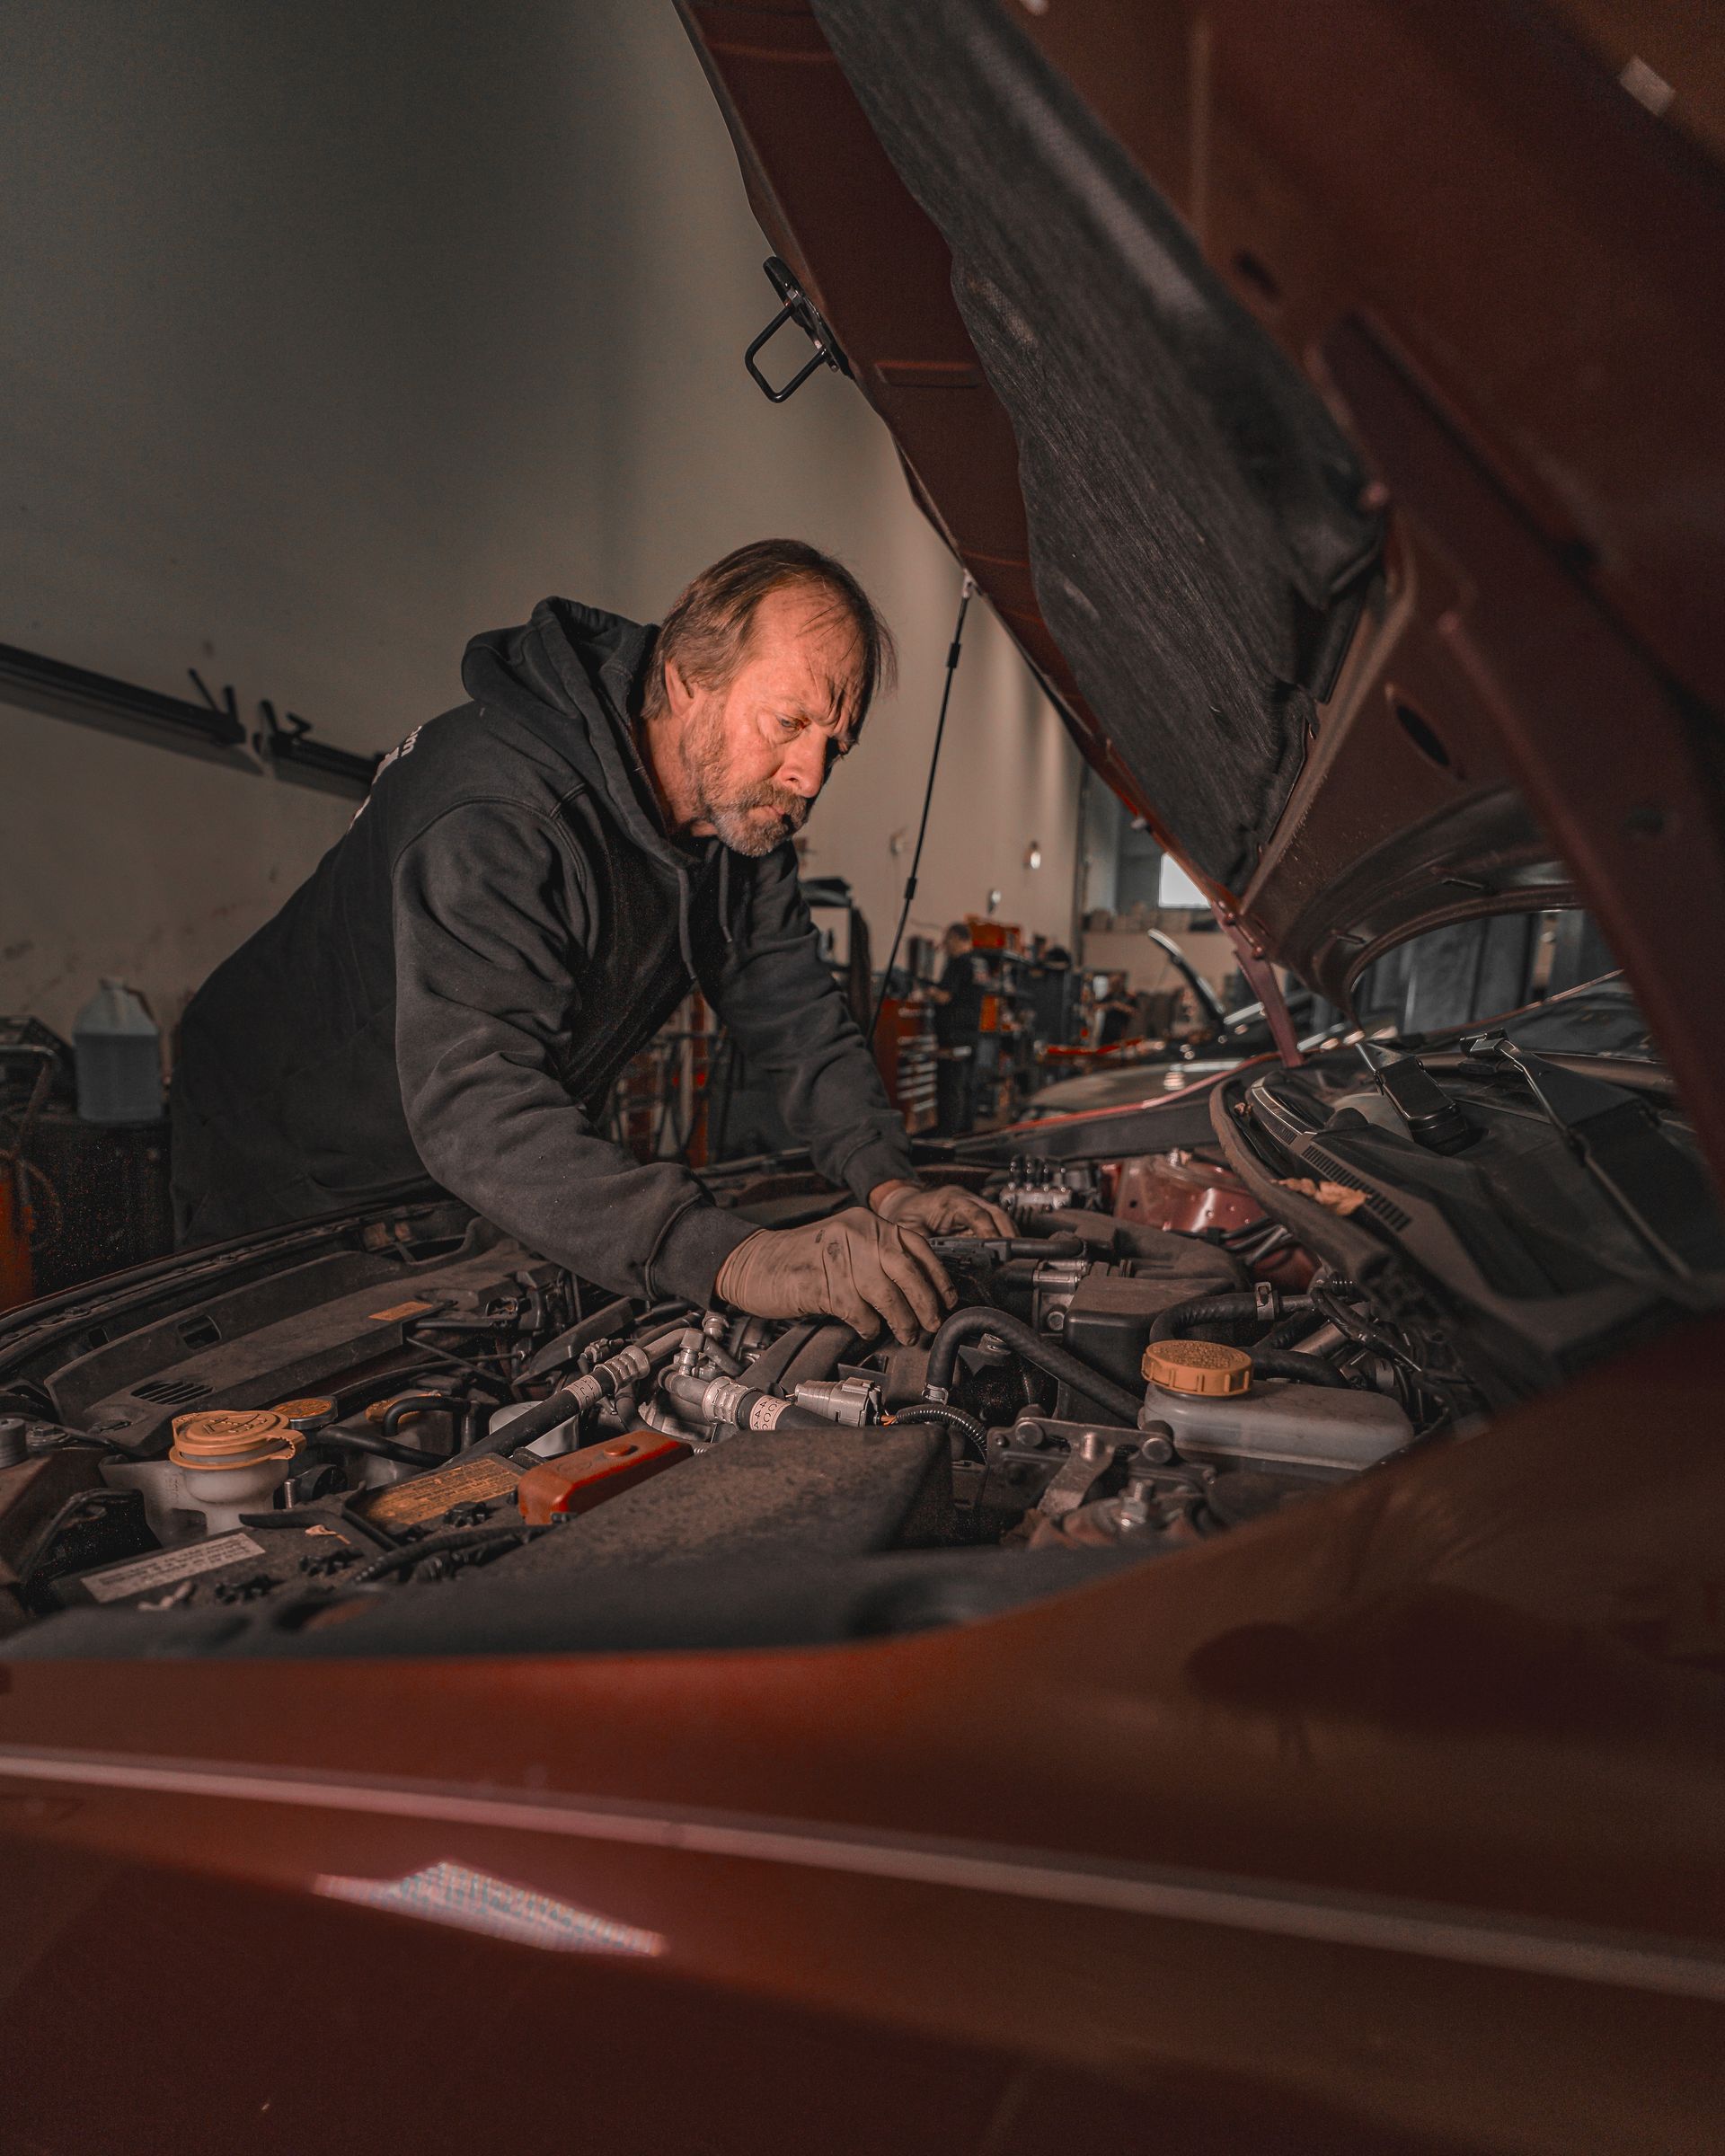 A mechanic dives into the open hood of a car at an auto repair shop.